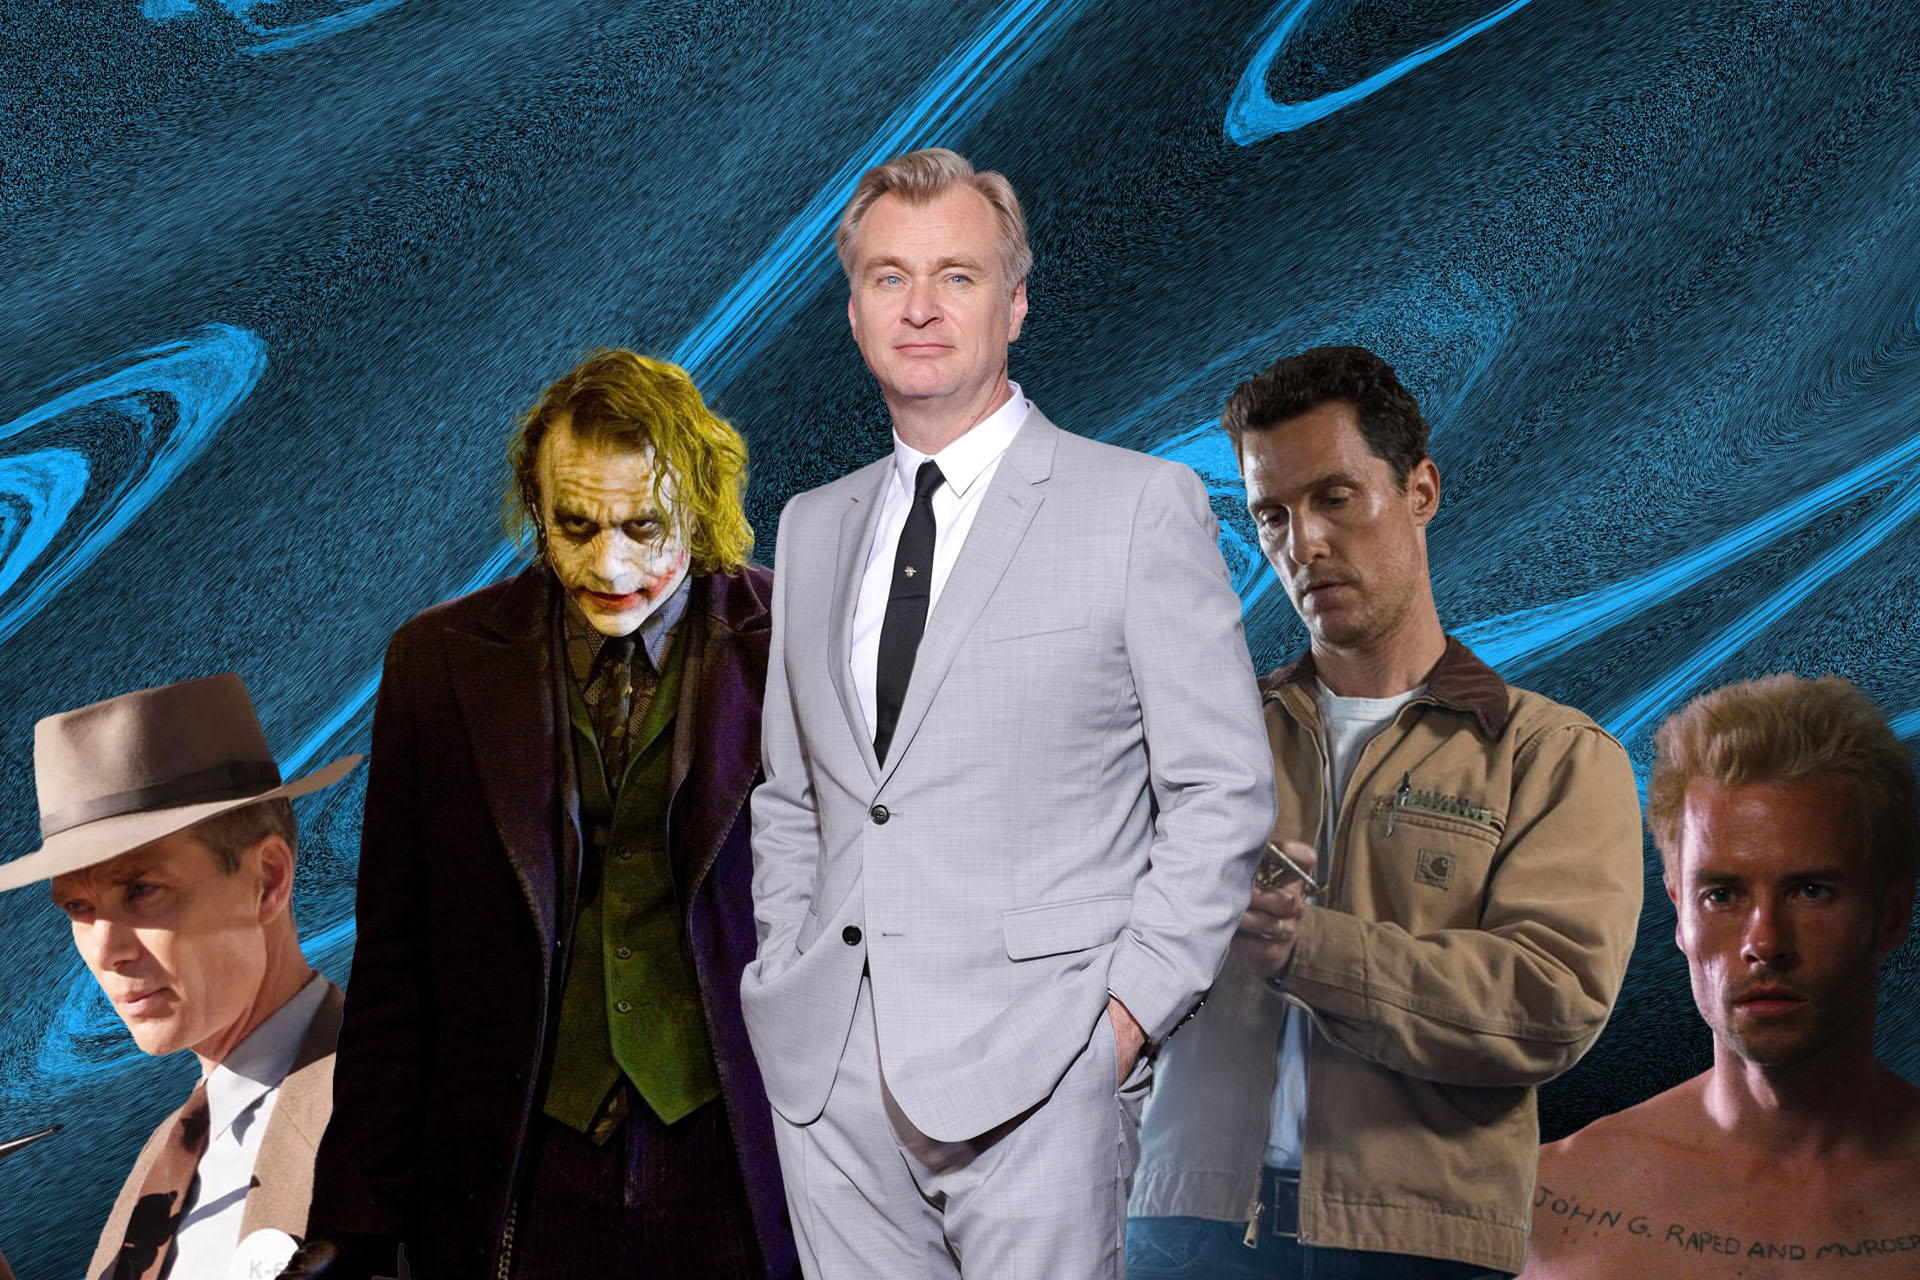 Christopher Nolan's top 10 movies according to IMDb and where to